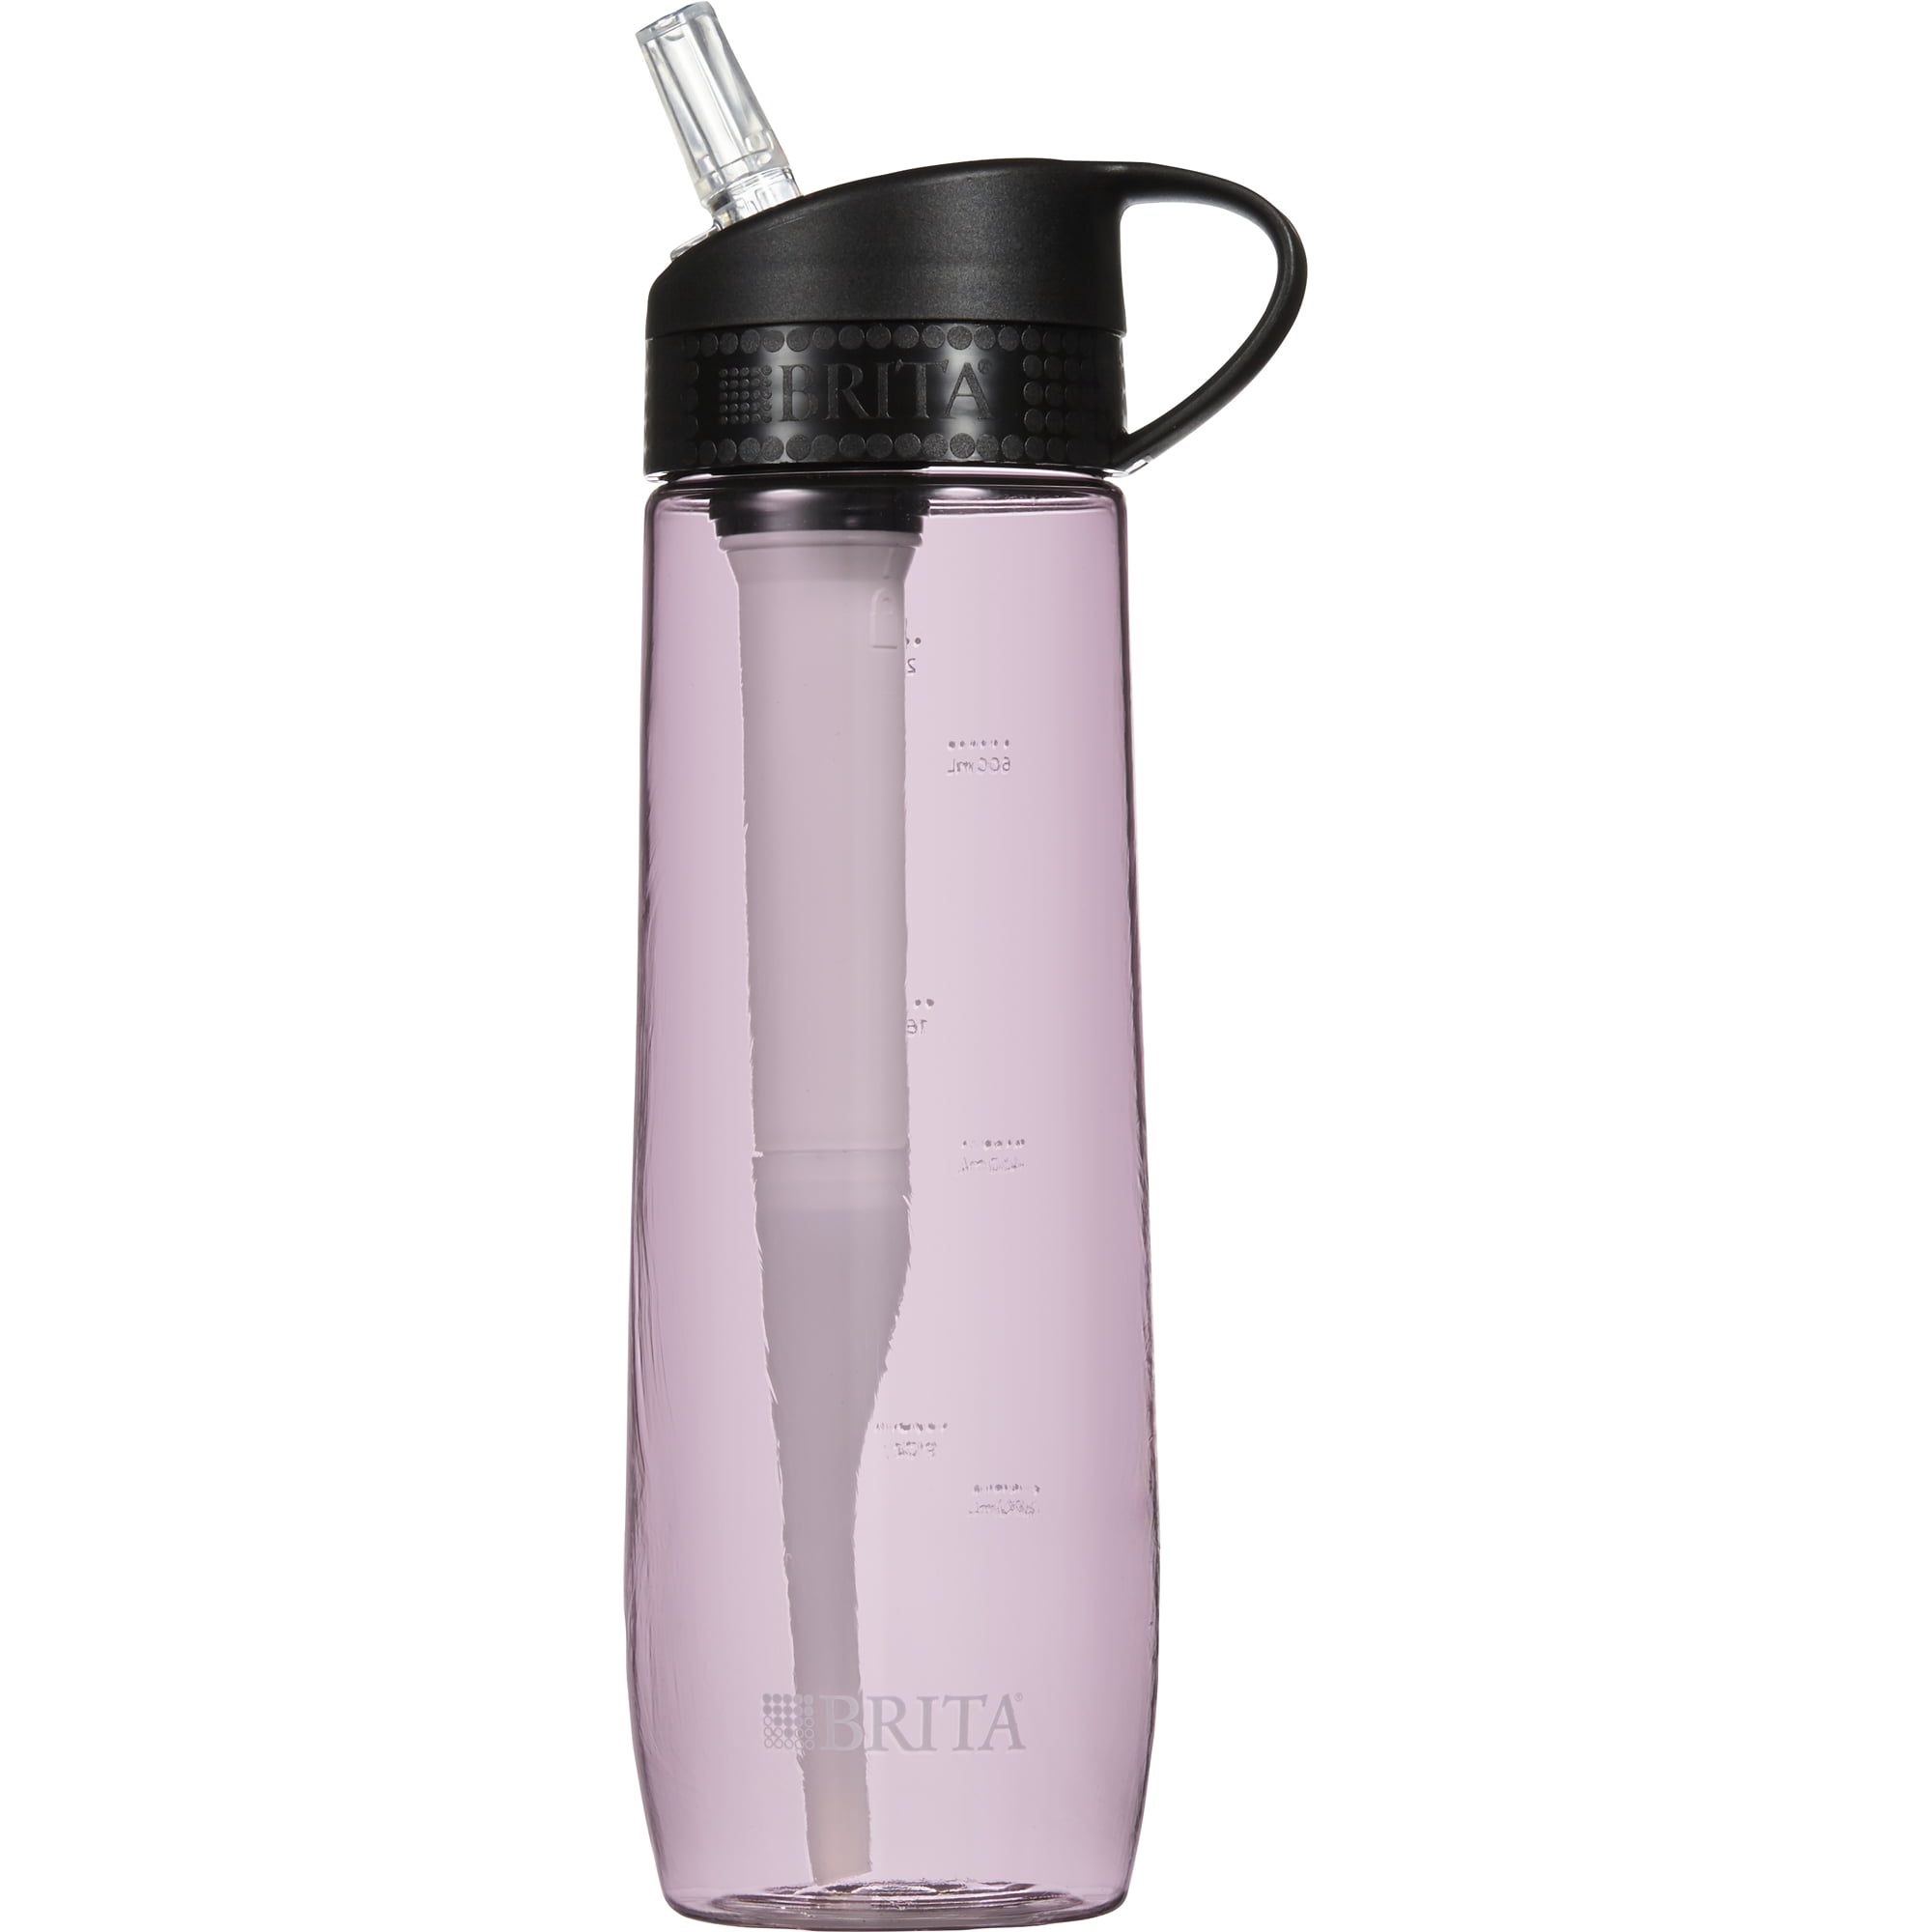 Brita 23.7 Ounce Hard Sided Water Bottle with 1 Filter, BPA Free